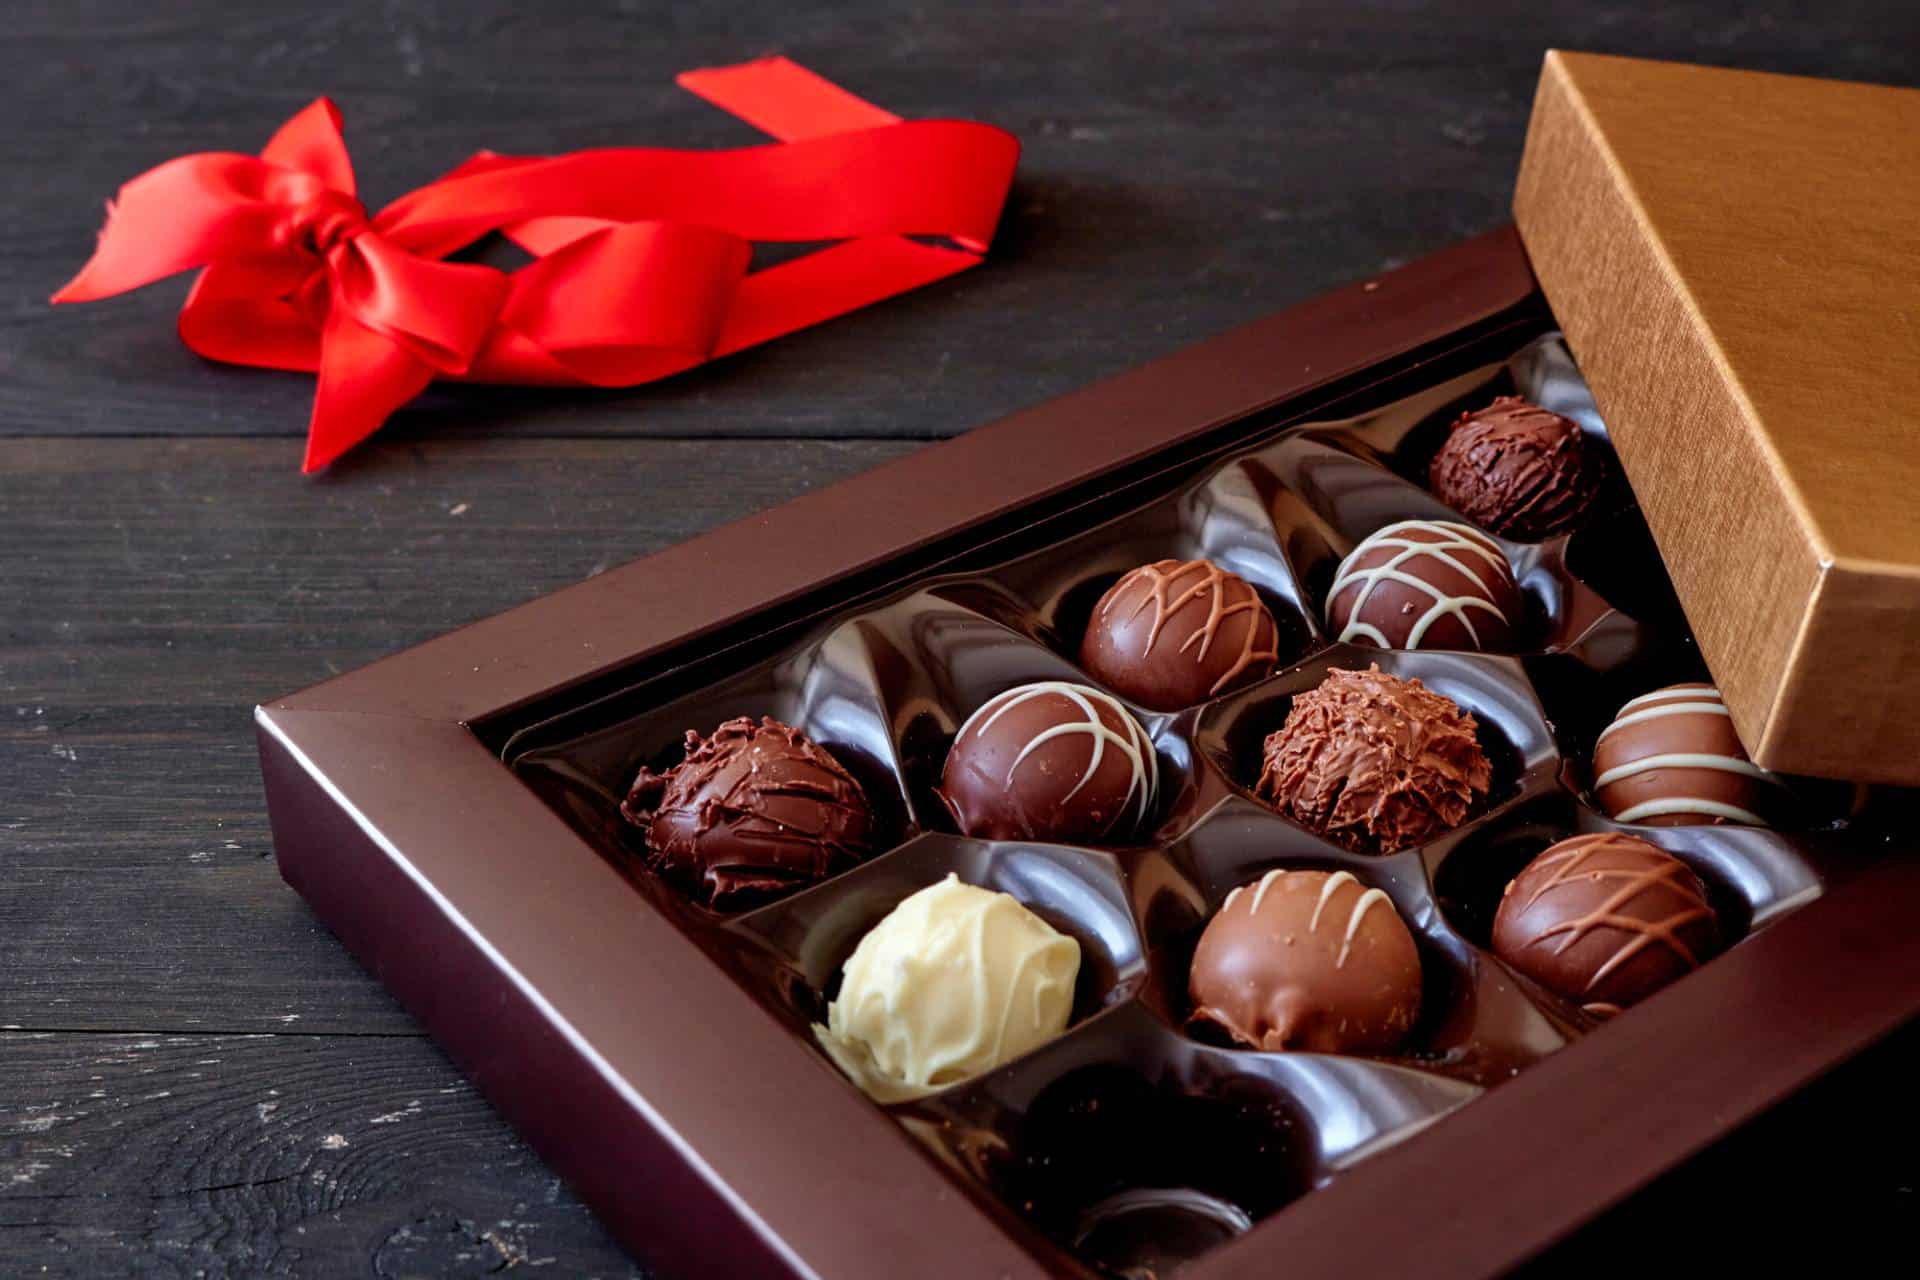 An open gift box of assorted chocolates.